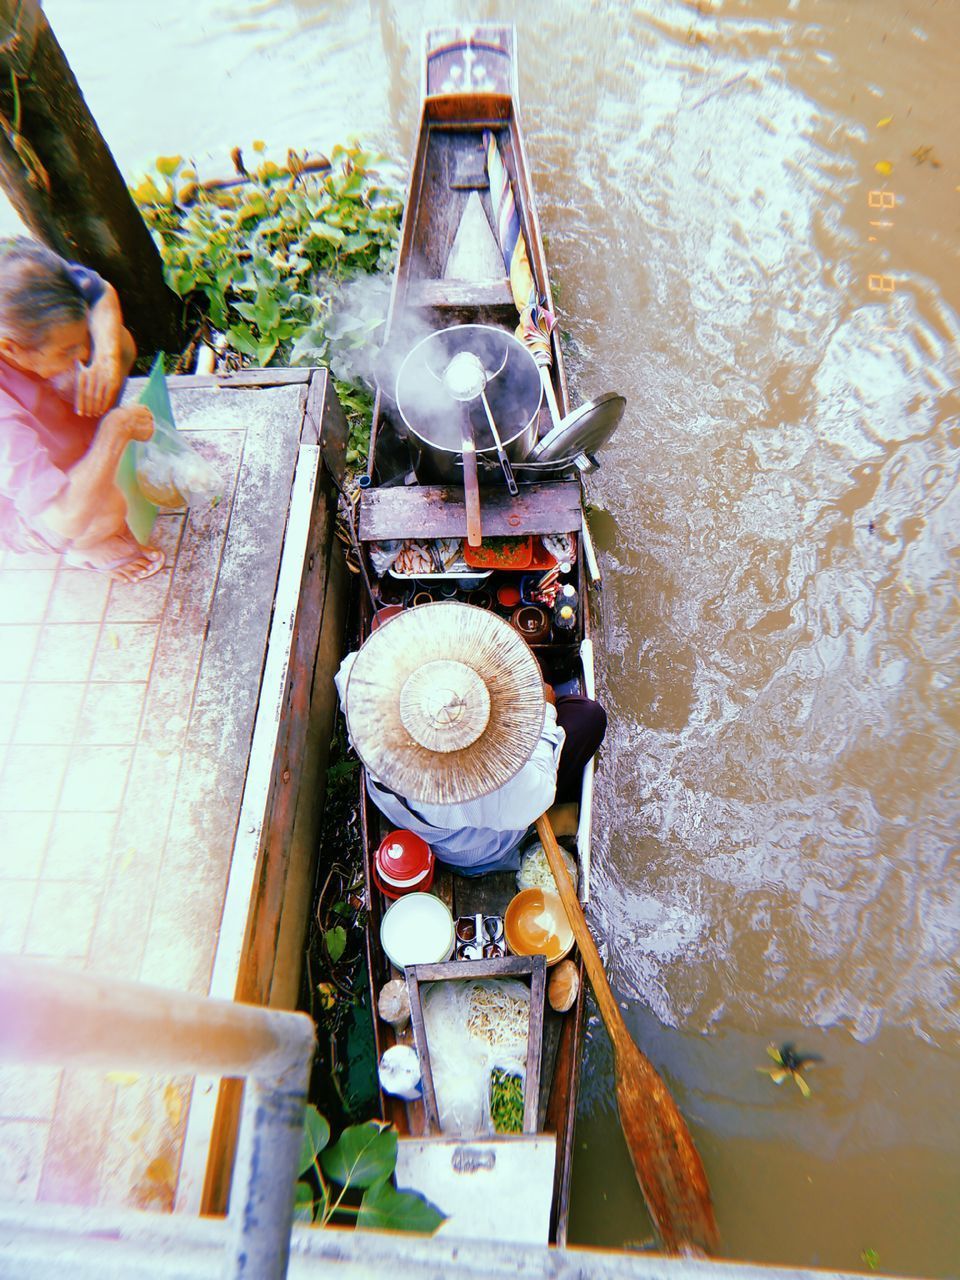 HIGH ANGLE VIEW OF FOOD IN BOAT AT RIVER